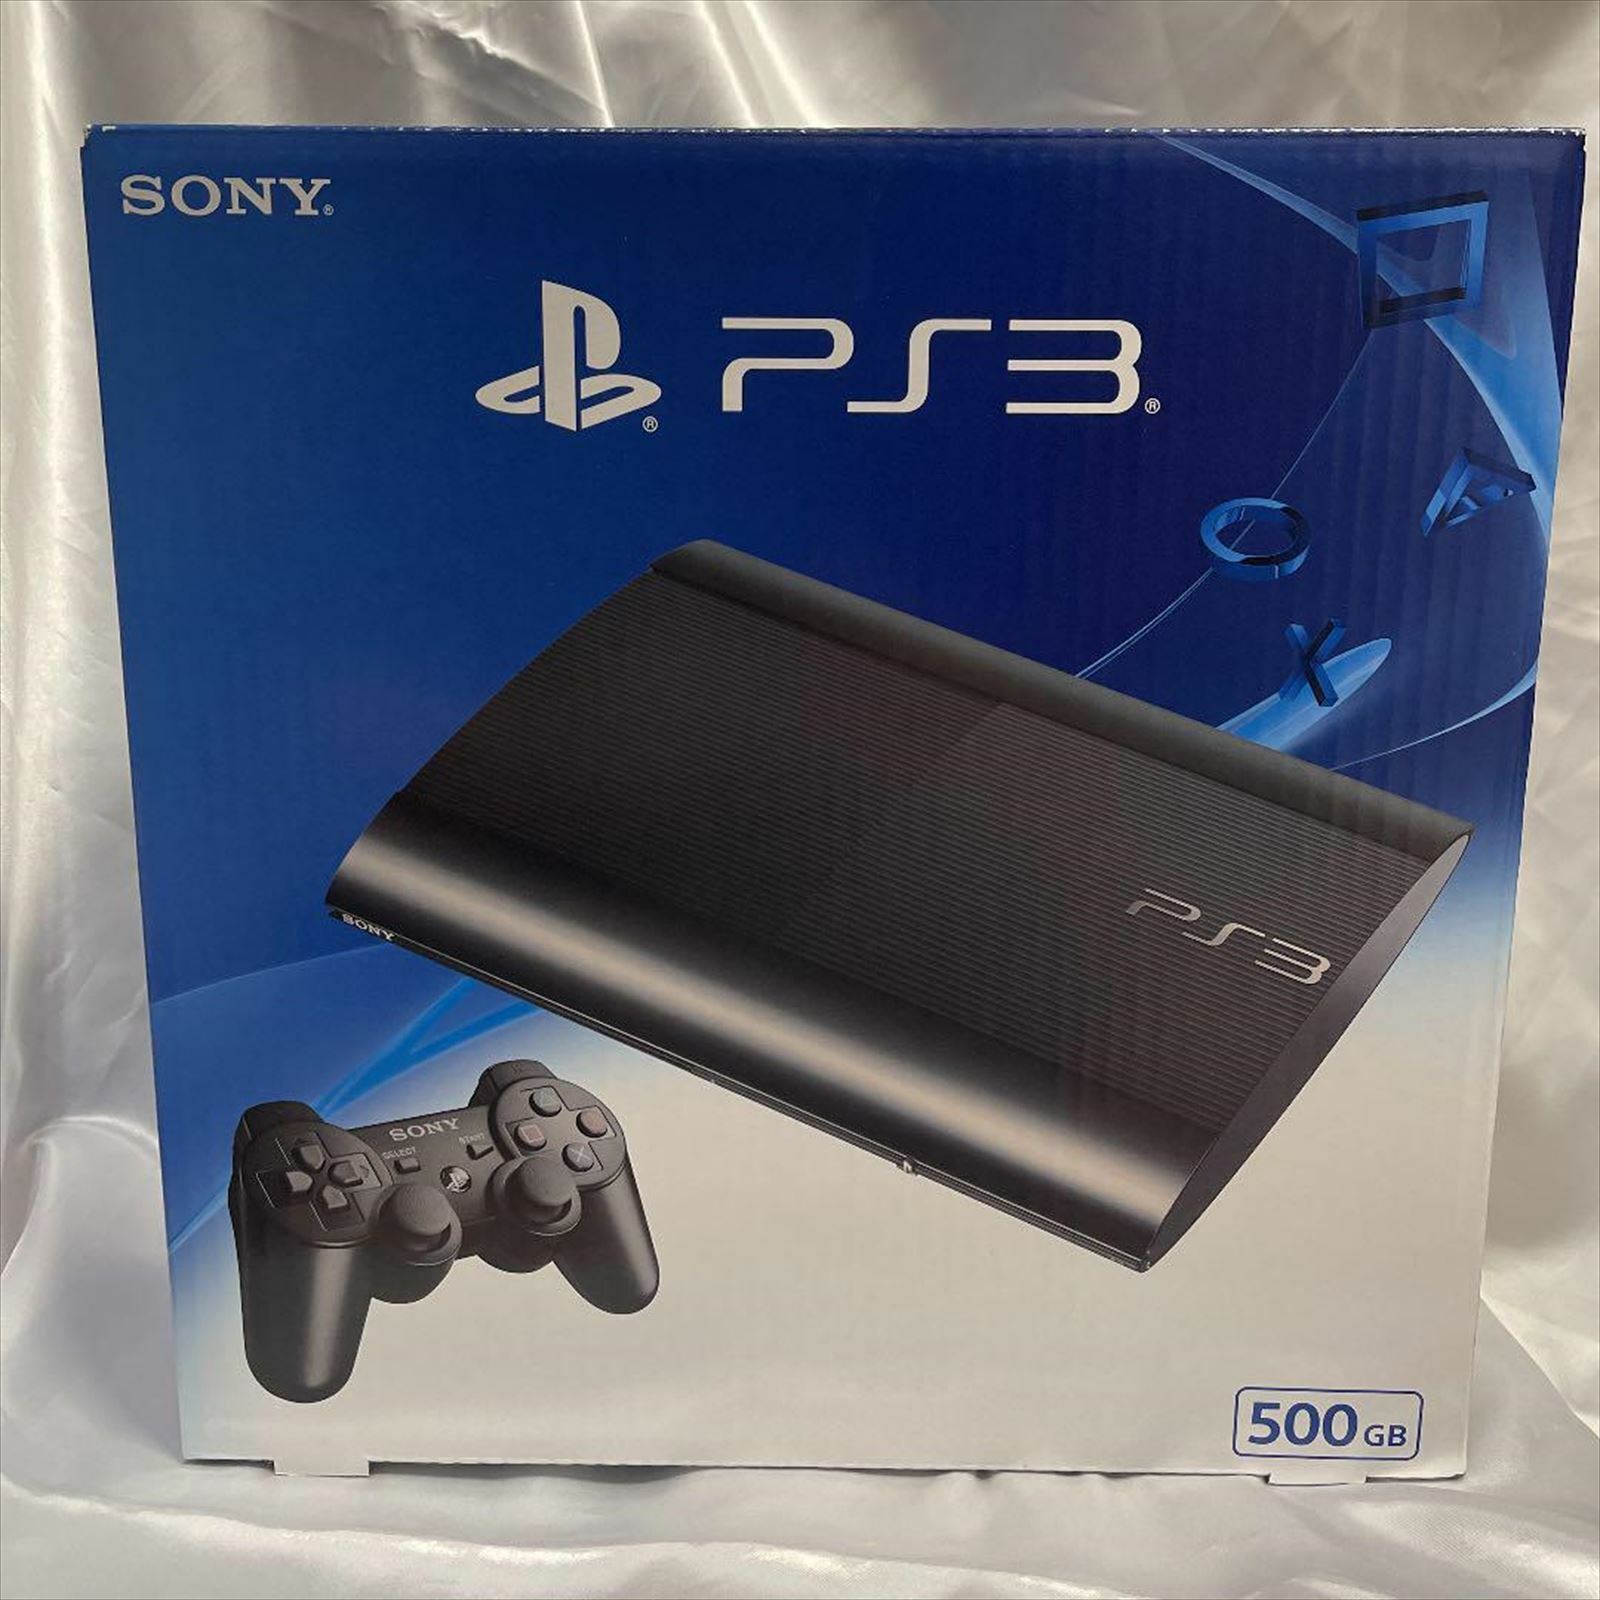 Sony PlayStation 3 500GB Charcoal Black Console System for sale 